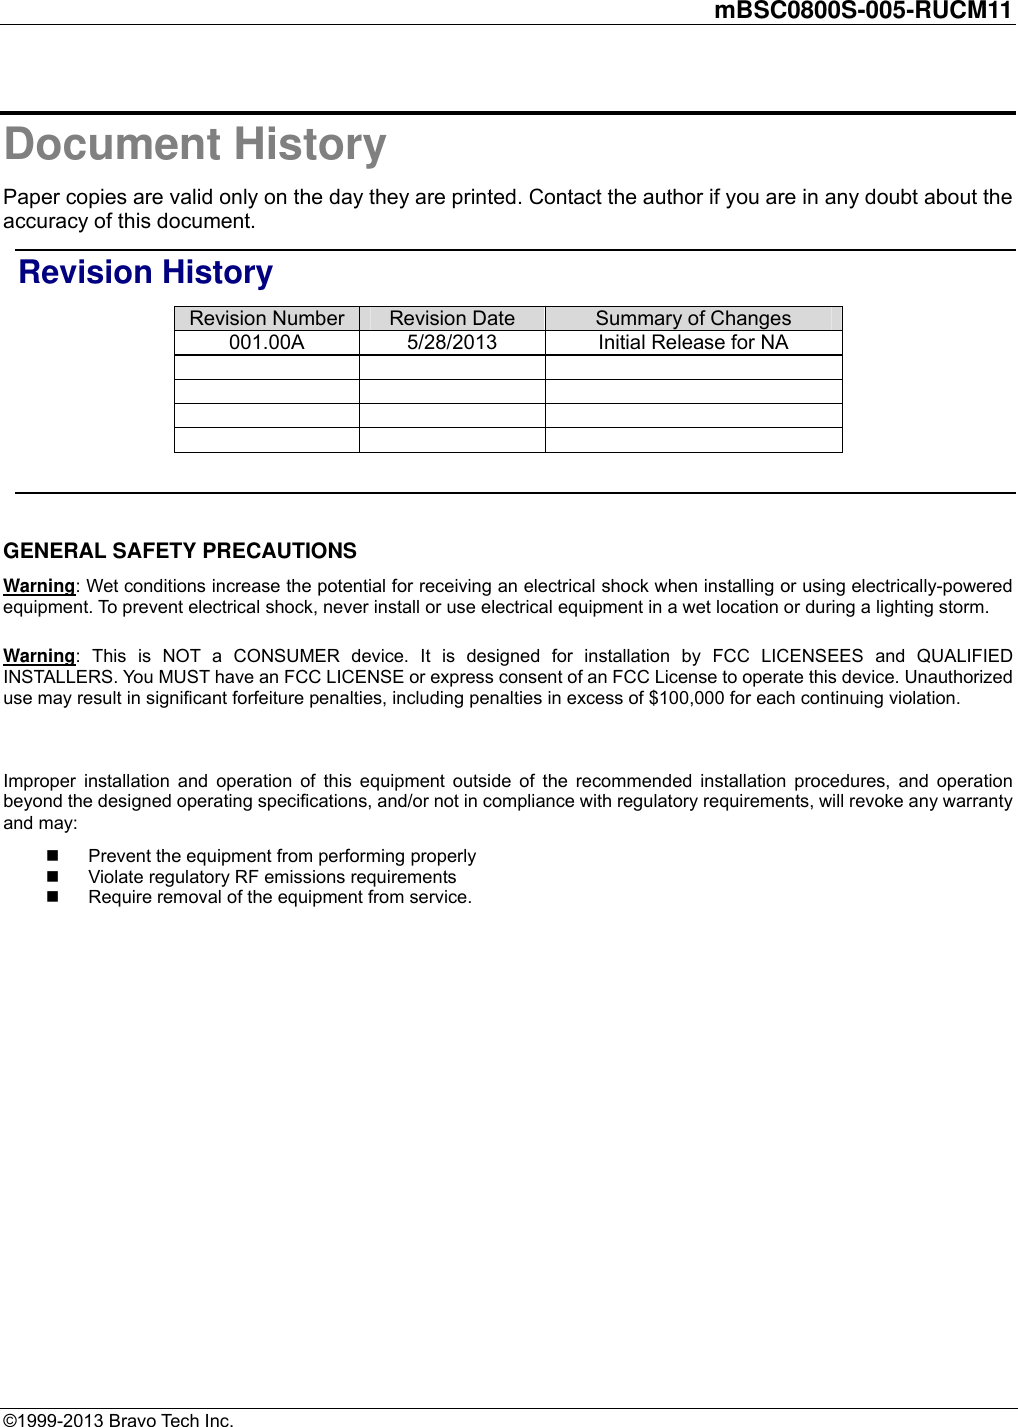         mBSC0800S-005-RUCM11   ©1999-2013 Bravo Tech Inc. Document History Paper copies are valid only on the day they are printed. Contact the author if you are in any doubt about the accuracy of this document. Revision History Revision Number  Revision Date  Summary of Changes 001.00A  5/28/2013  Initial Release for NA                     GENERAL SAFETY PRECAUTIONS Warning: Wet conditions increase the potential for receiving an electrical shock when installing or using electrically-powered equipment. To prevent electrical shock, never install or use electrical equipment in a wet location or during a lighting storm. Warning: This is NOT a CONSUMER device. It is designed for installation by FCC LICENSEES and QUALIFIED INSTALLERS. You MUST have an FCC LICENSE or express consent of an FCC License to operate this device. Unauthorized use may result in significant forfeiture penalties, including penalties in excess of $100,000 for each continuing violation.  Improper installation and operation of this equipment outside of the recommended installation procedures, and operation beyond the designed operating specifications, and/or not in compliance with regulatory requirements, will revoke any warranty and may:   Prevent the equipment from performing properly   Violate regulatory RF emissions requirements   Require removal of the equipment from service.  